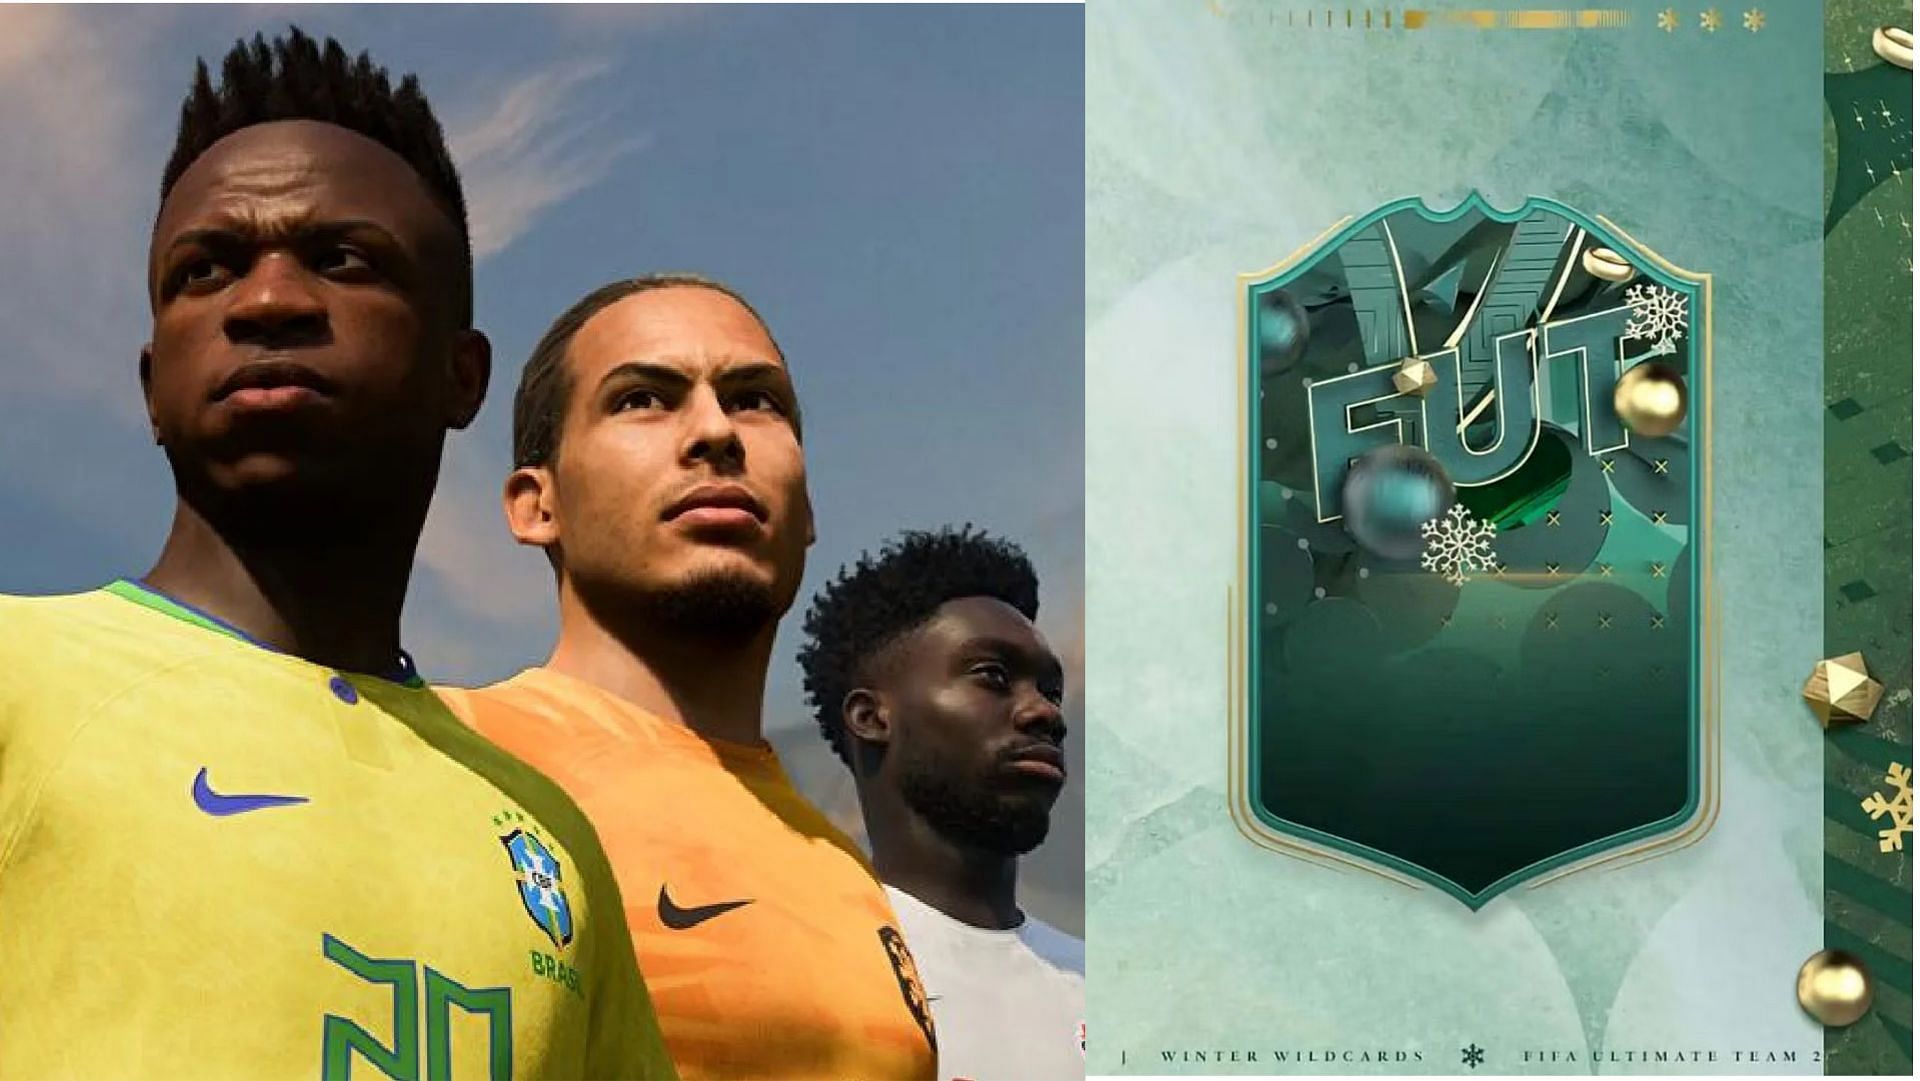 The Winter Wildcards promo has been a great follow up to the World Cup content (Images via EA Sports)